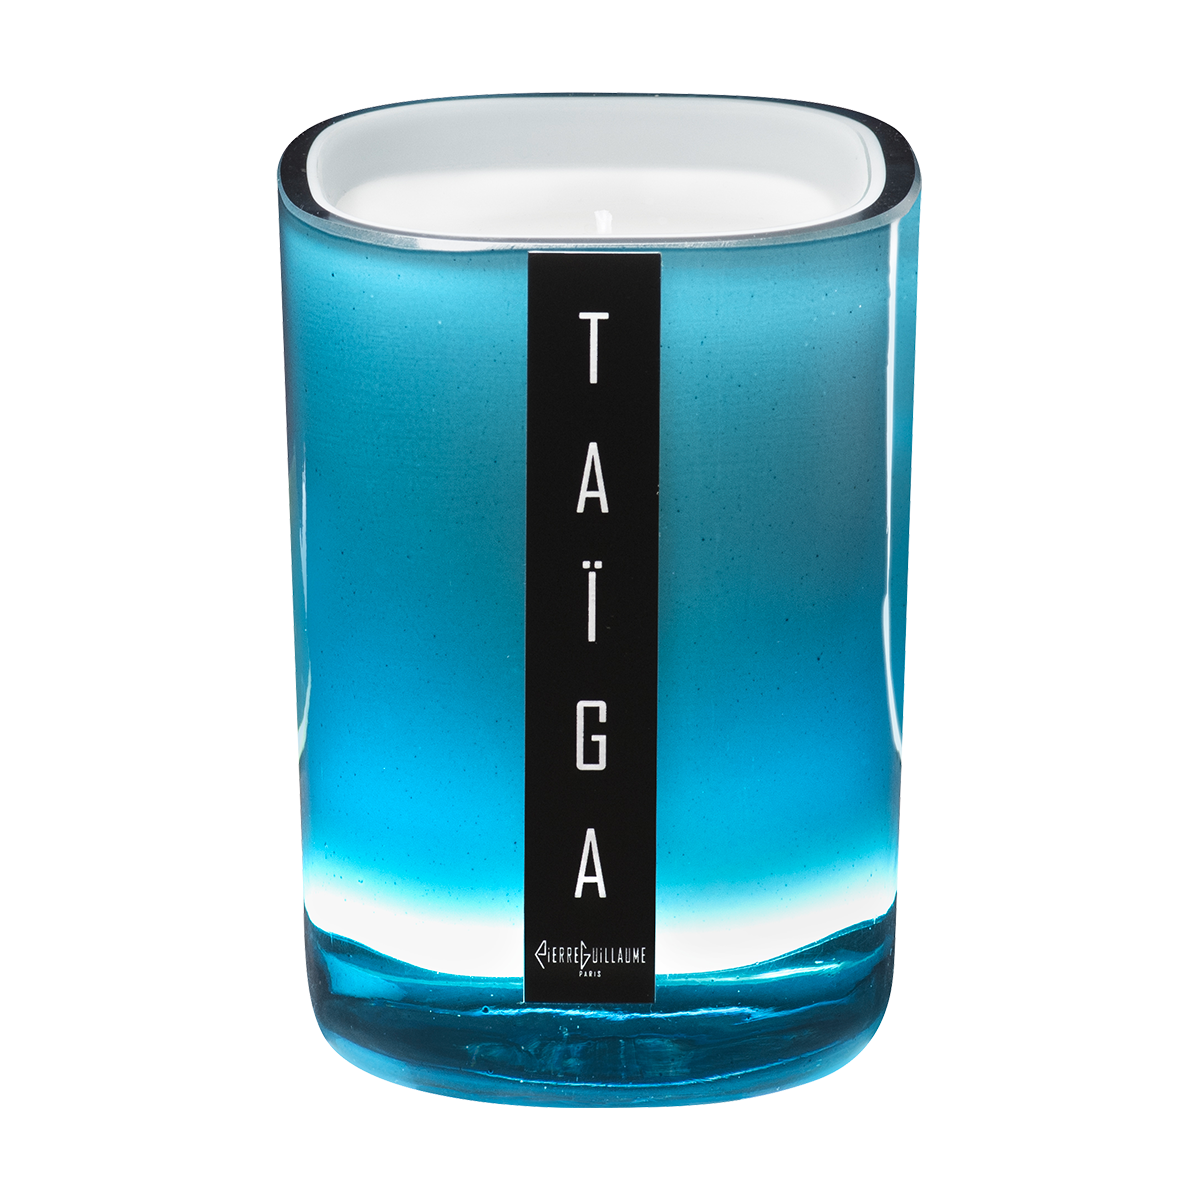 TAIGA Scented Candle 240g